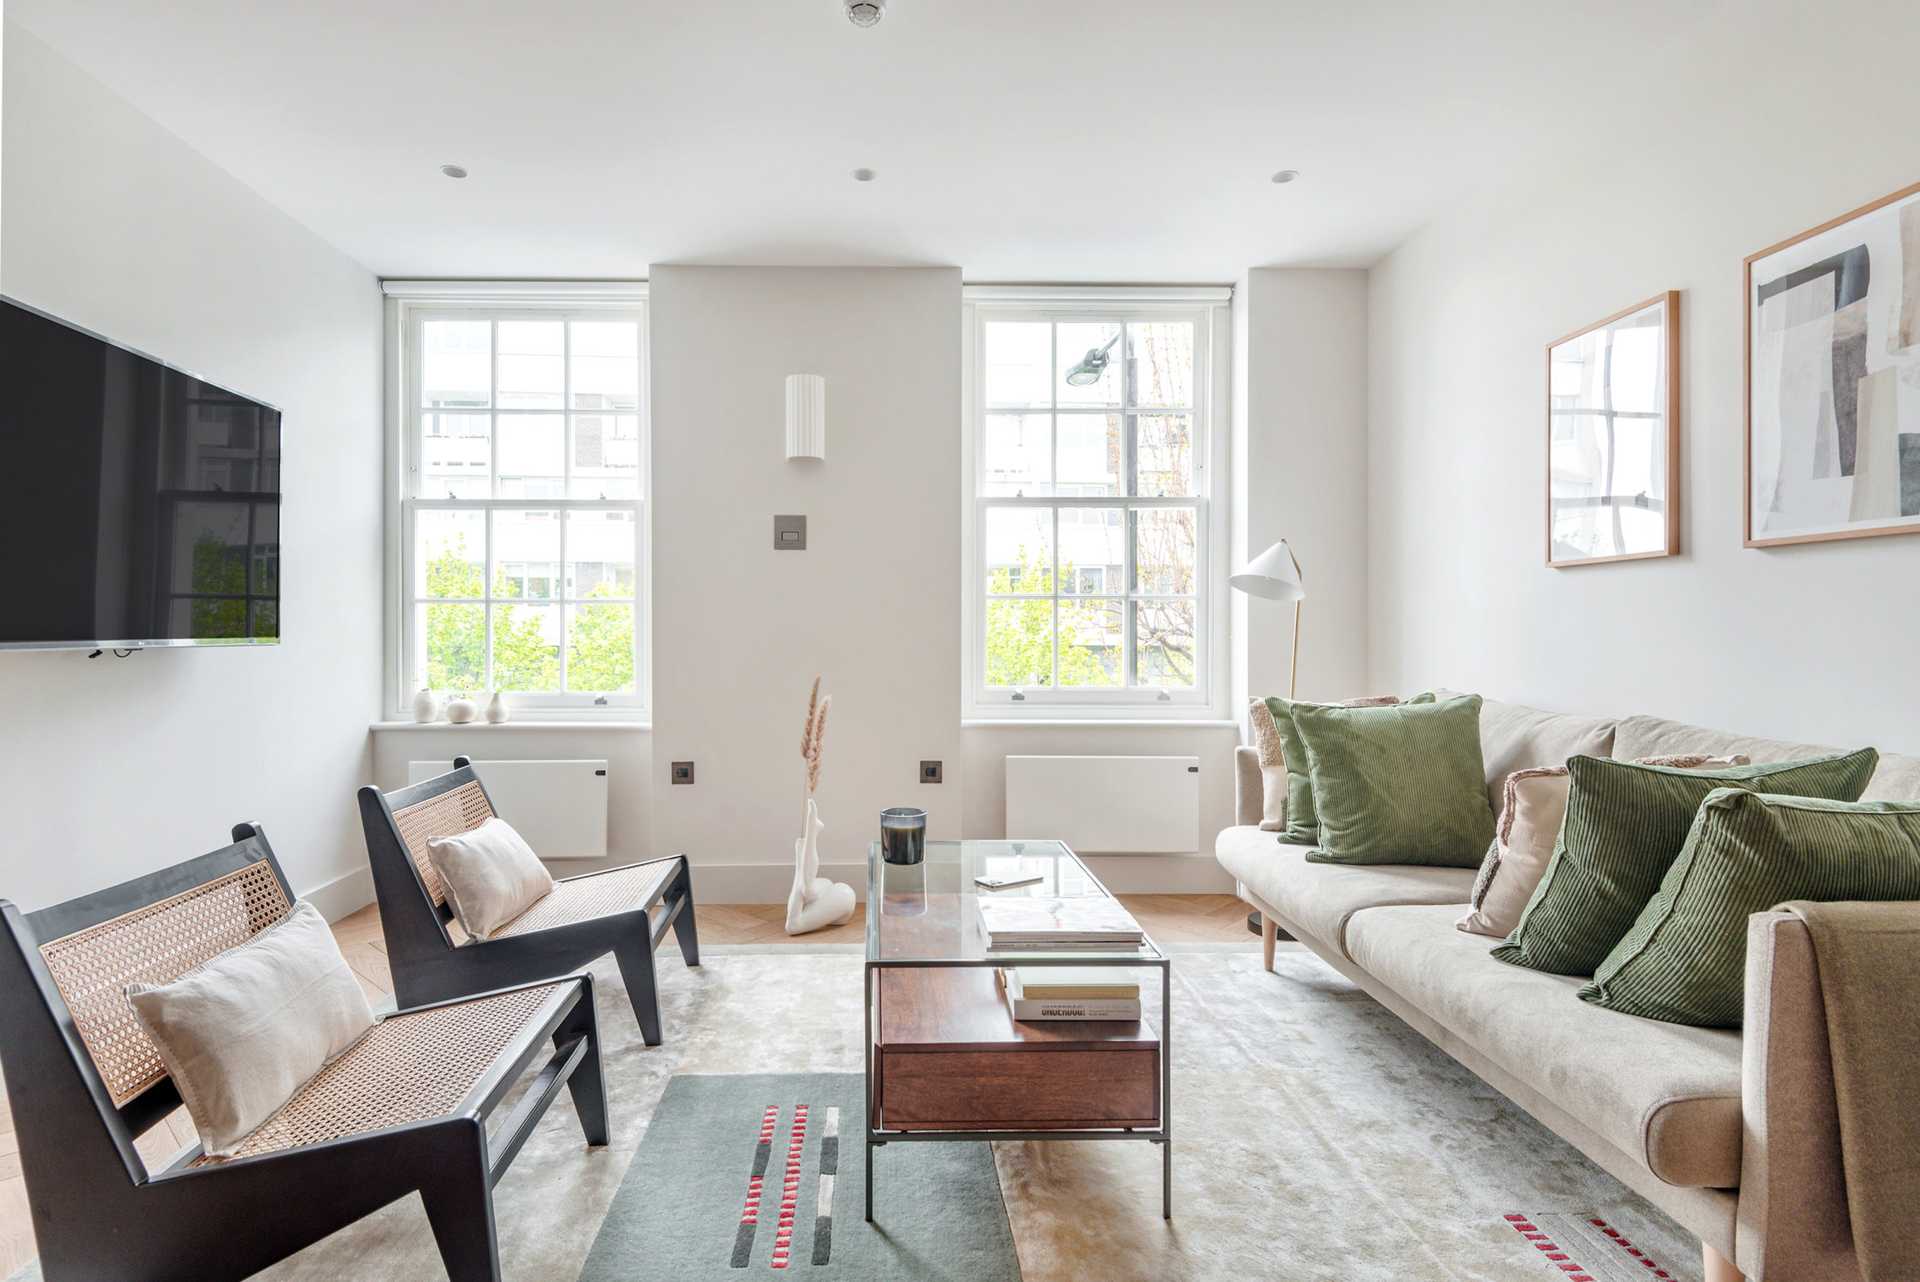 City Relay introduces Notting Hill Residences